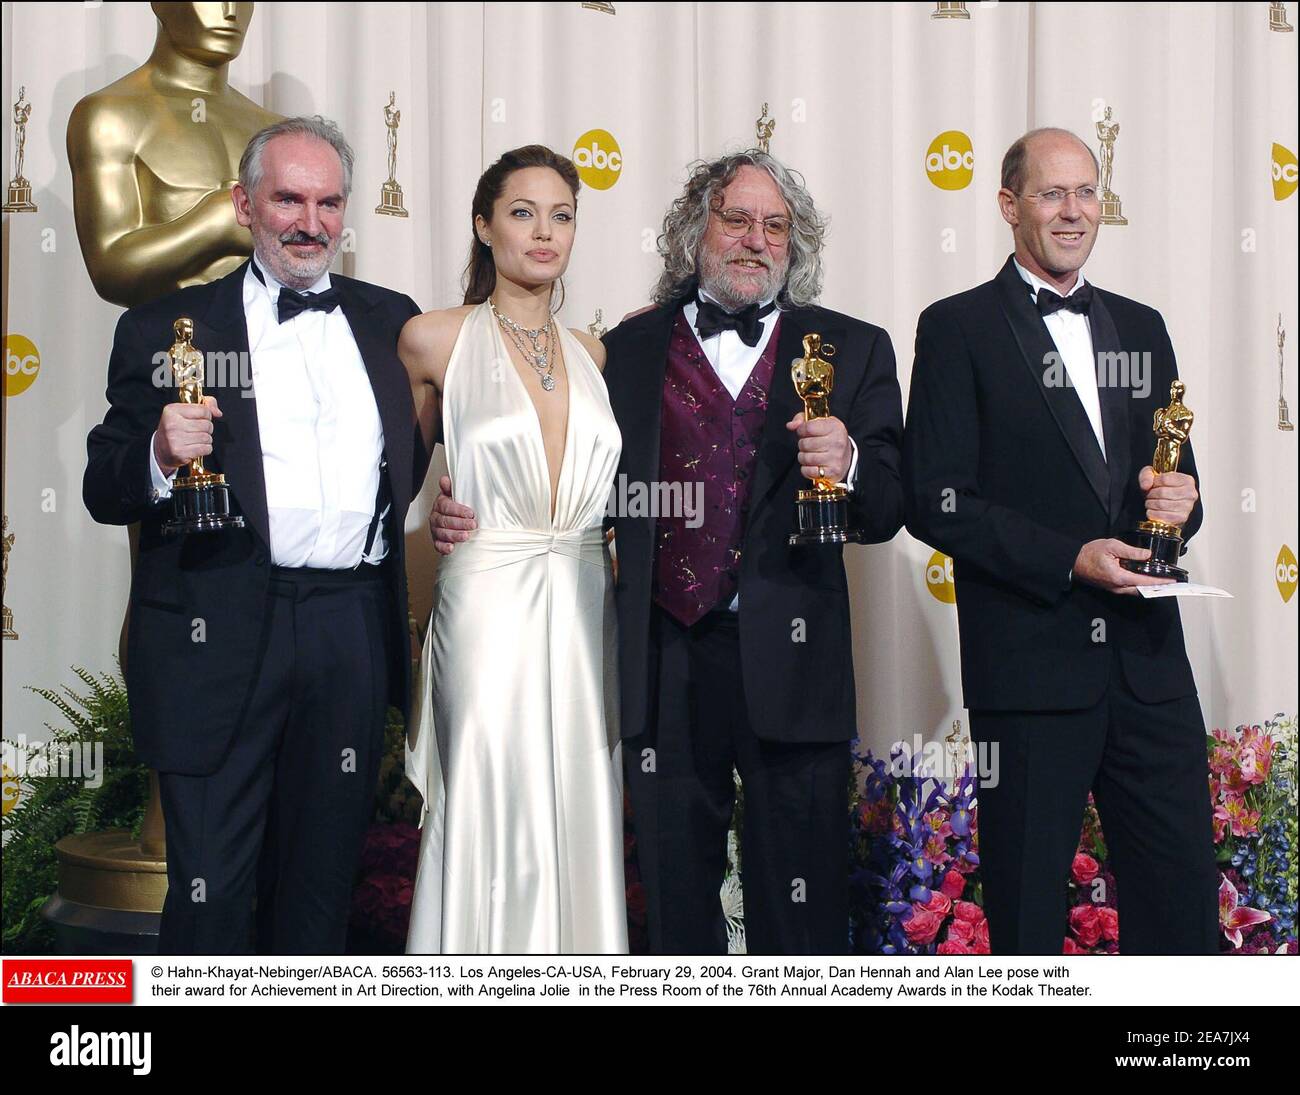 Grant Major, Dan Hennah and Alan Lee pose with their award for Achievement in Art Direction, with Angelina Jolie in the Press Room of the 76th Annual Academy Awards in the Kodak Theater, Los Angeles, CA. February 29, 2004 (Pictured : Grant Major, Dan Hennah, Alan Lee, Angelina Jolie) Photo by Hahn-Khayat-Nebinger/ABACA Stock Photo